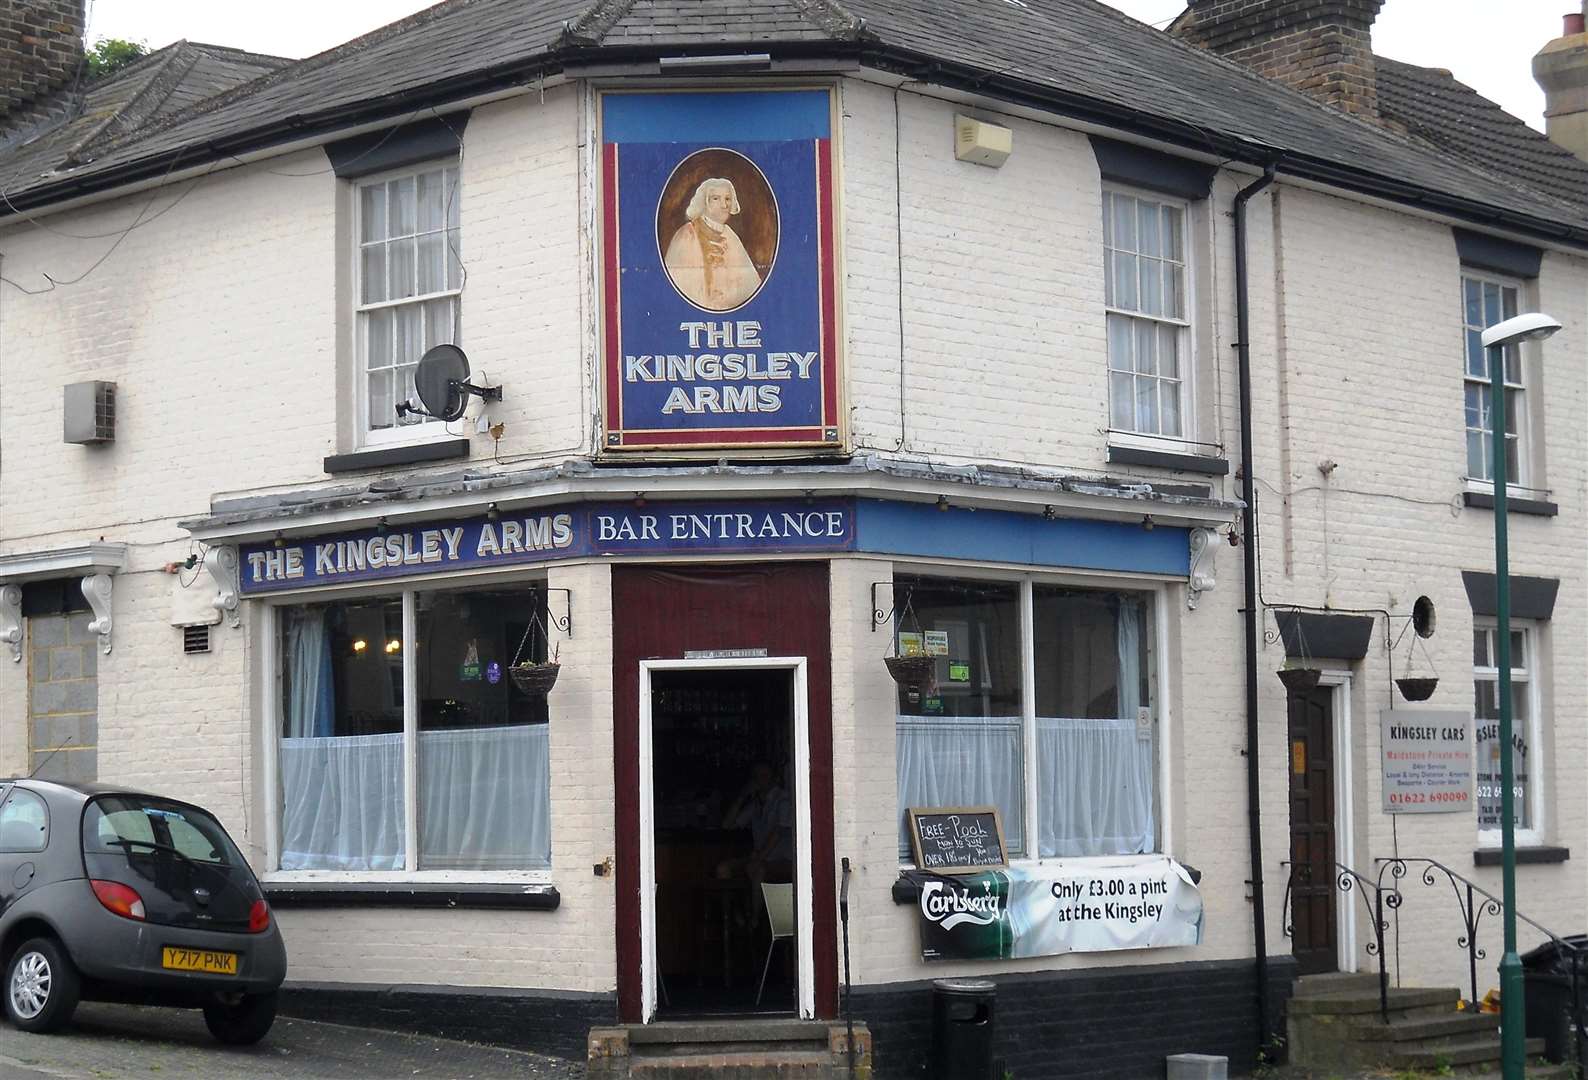 The Kingsley Arms in Maidstone is one of the pubs that has shut